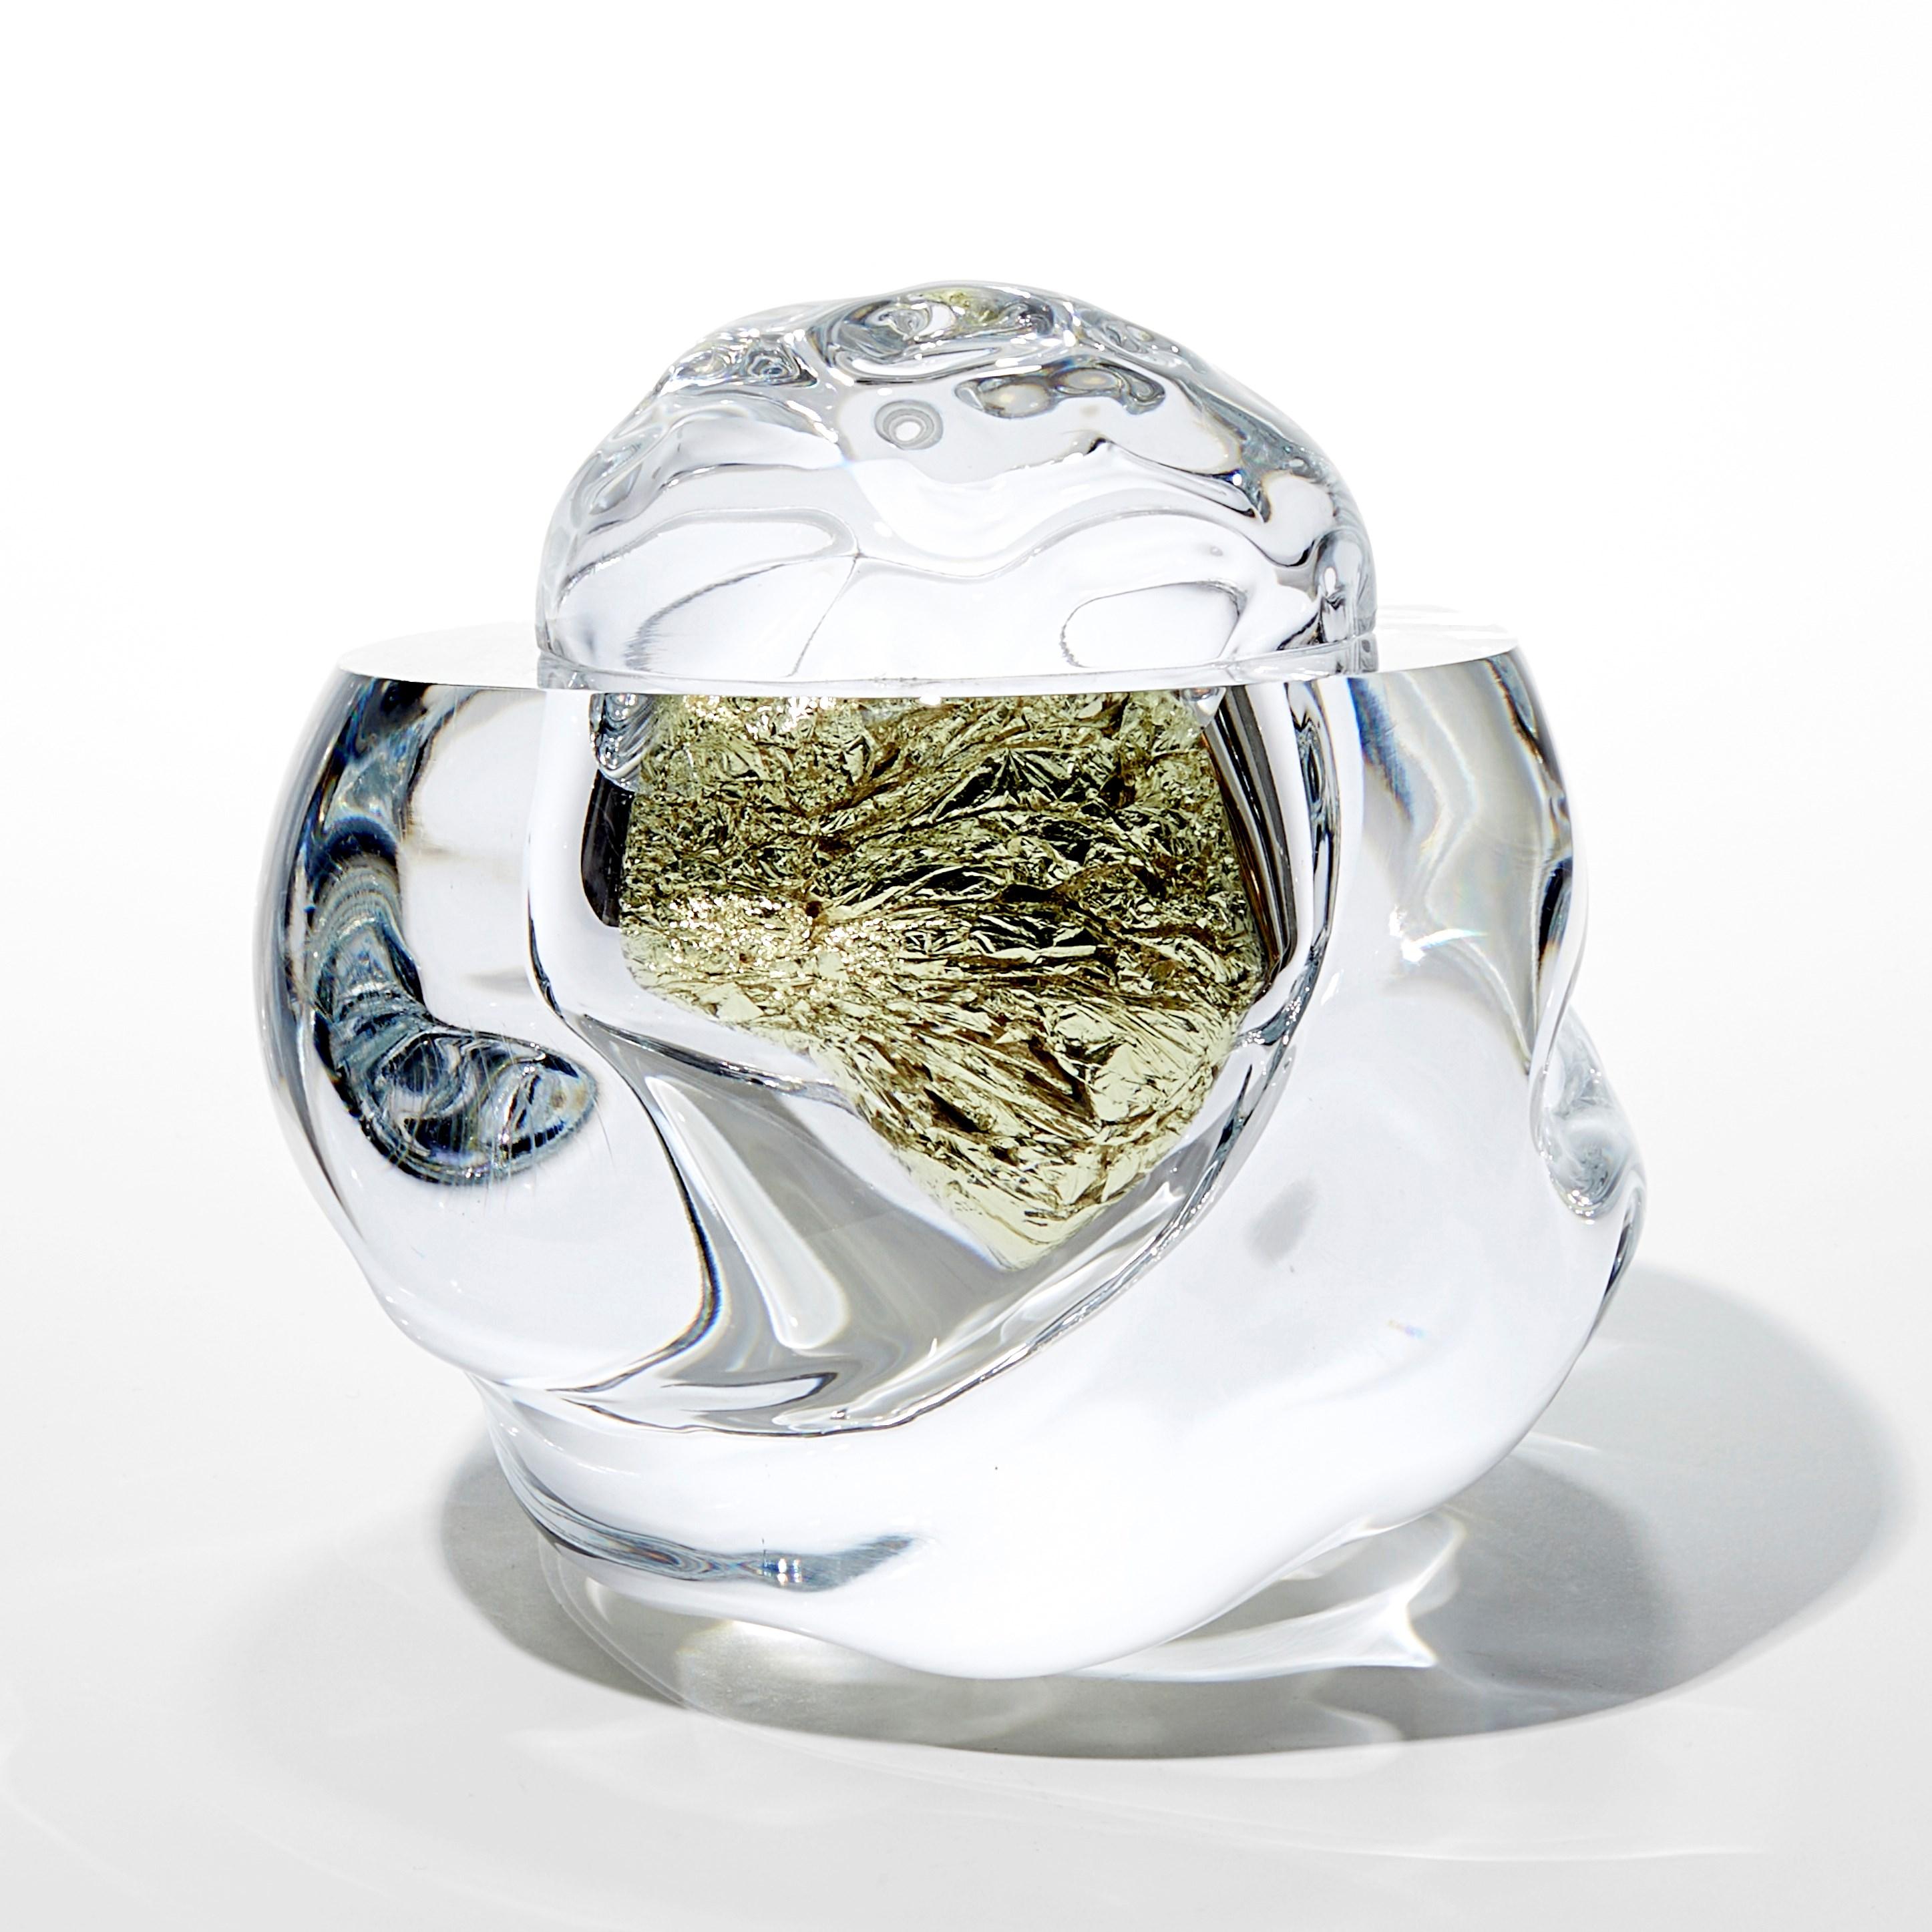 British Erratic J with 18ct Green Gold, amorphic optical glass artwork by Anthony Scala For Sale